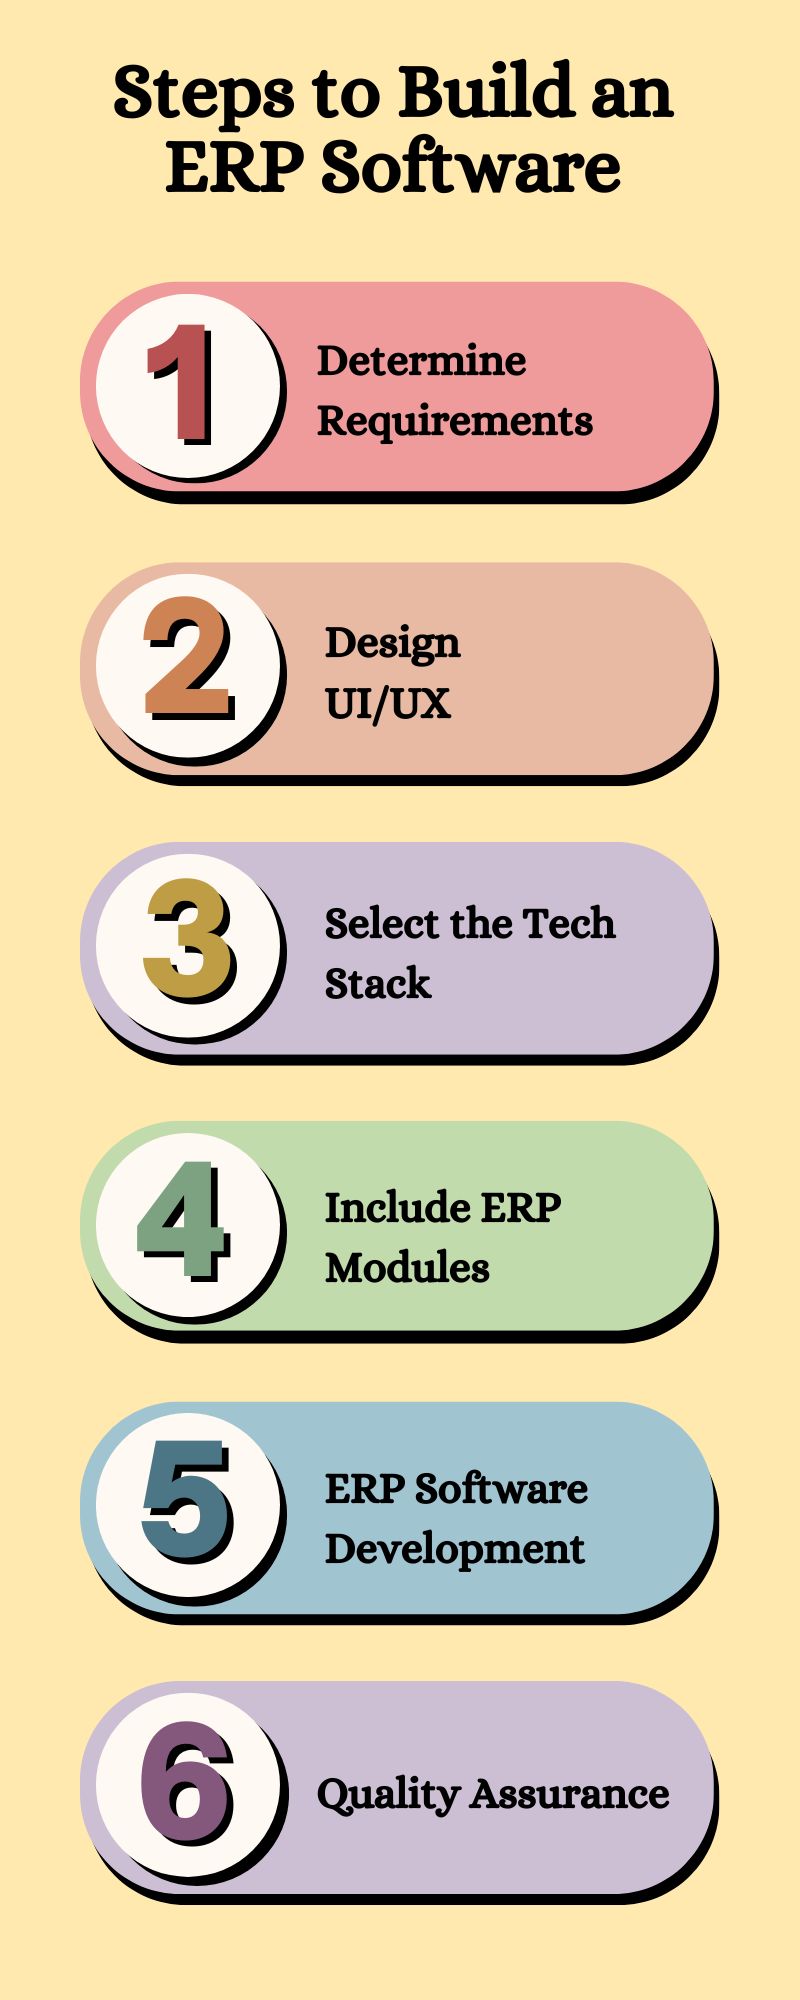 Steps to Build an ERP Software